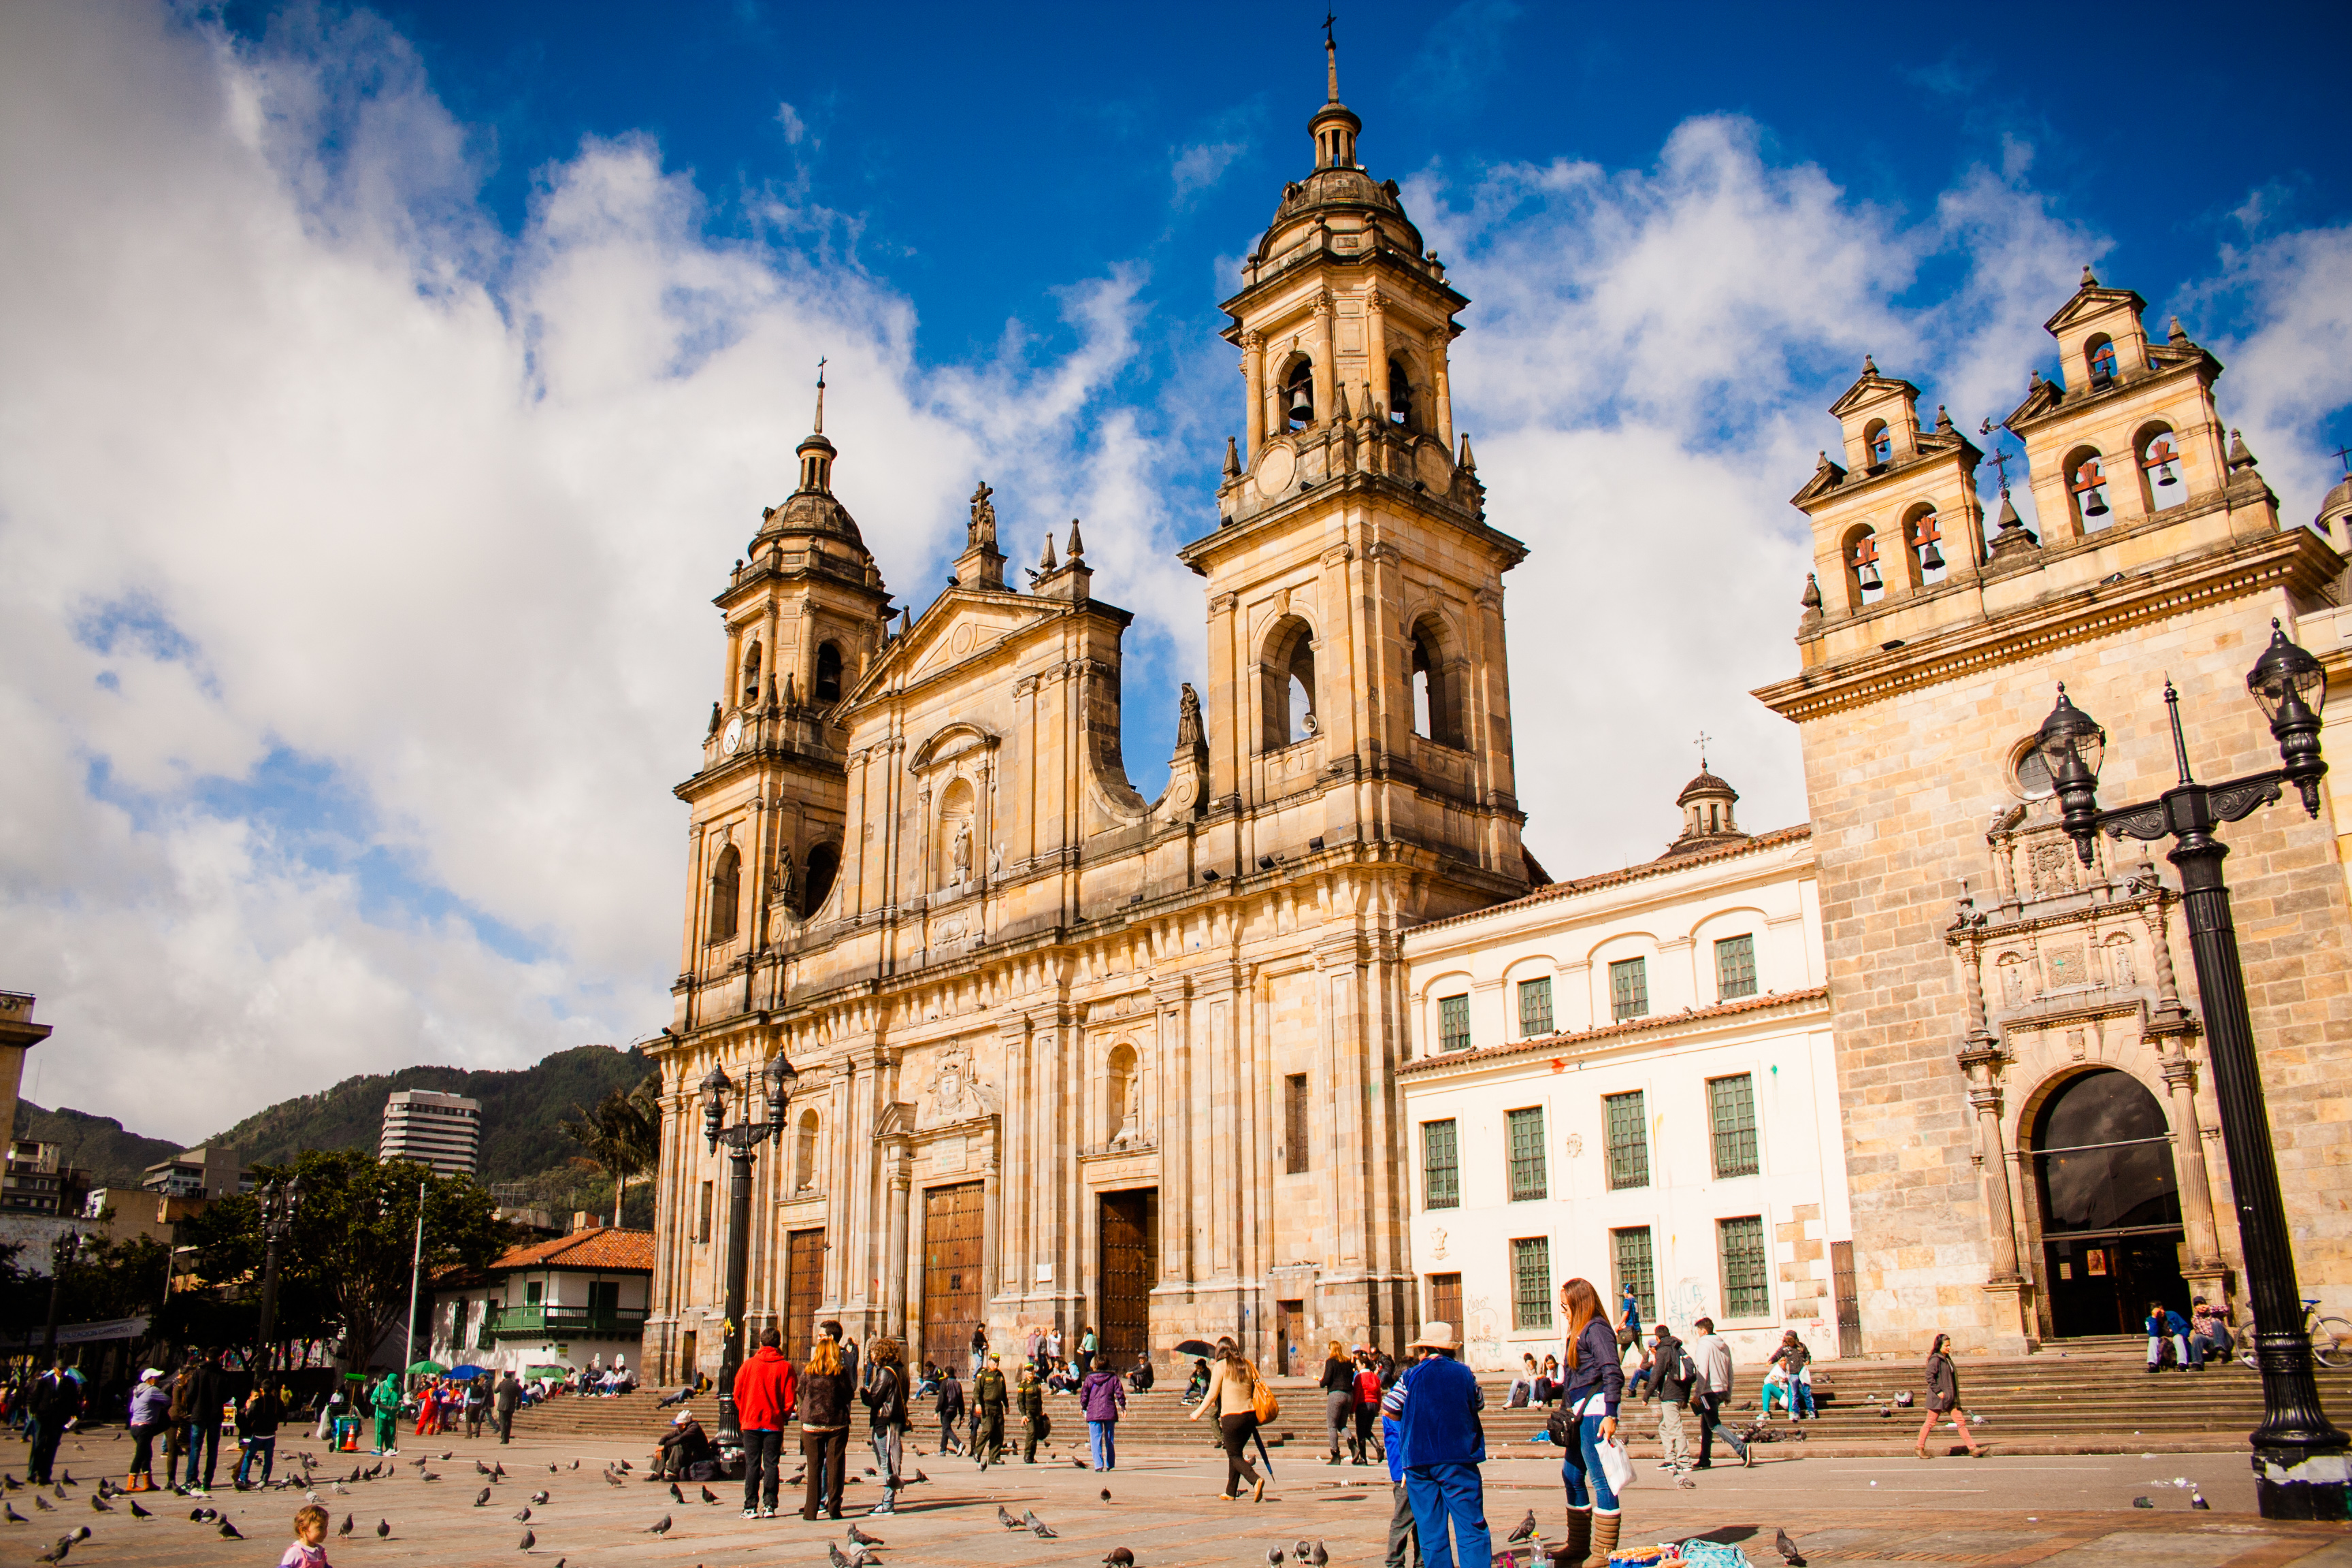 Flights to Bogota in the $300s-$400s round-trip!